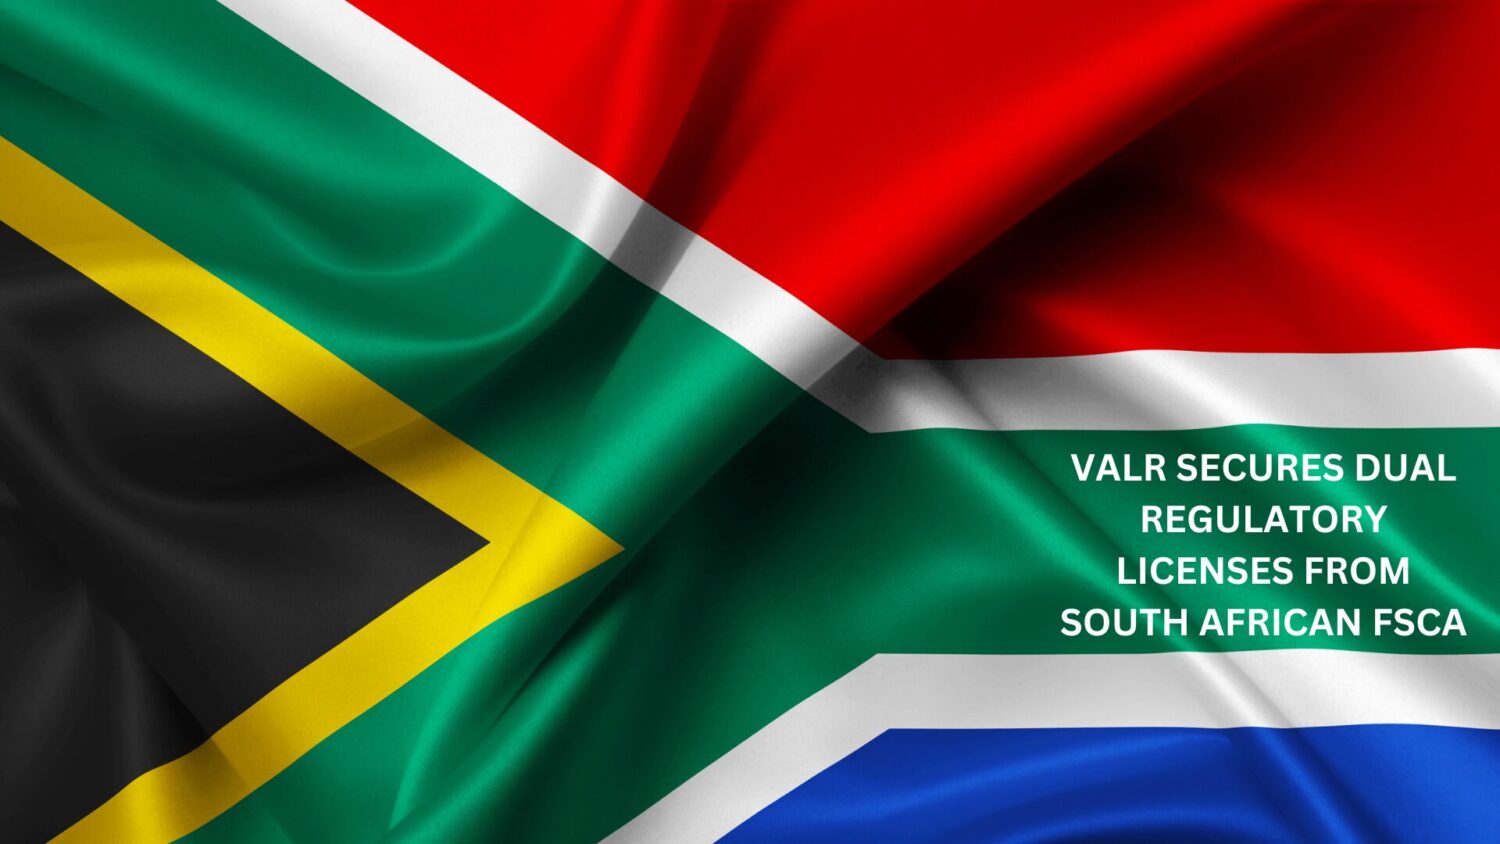 Valr Secures Dual Regulatory Licenses From South African Fsca